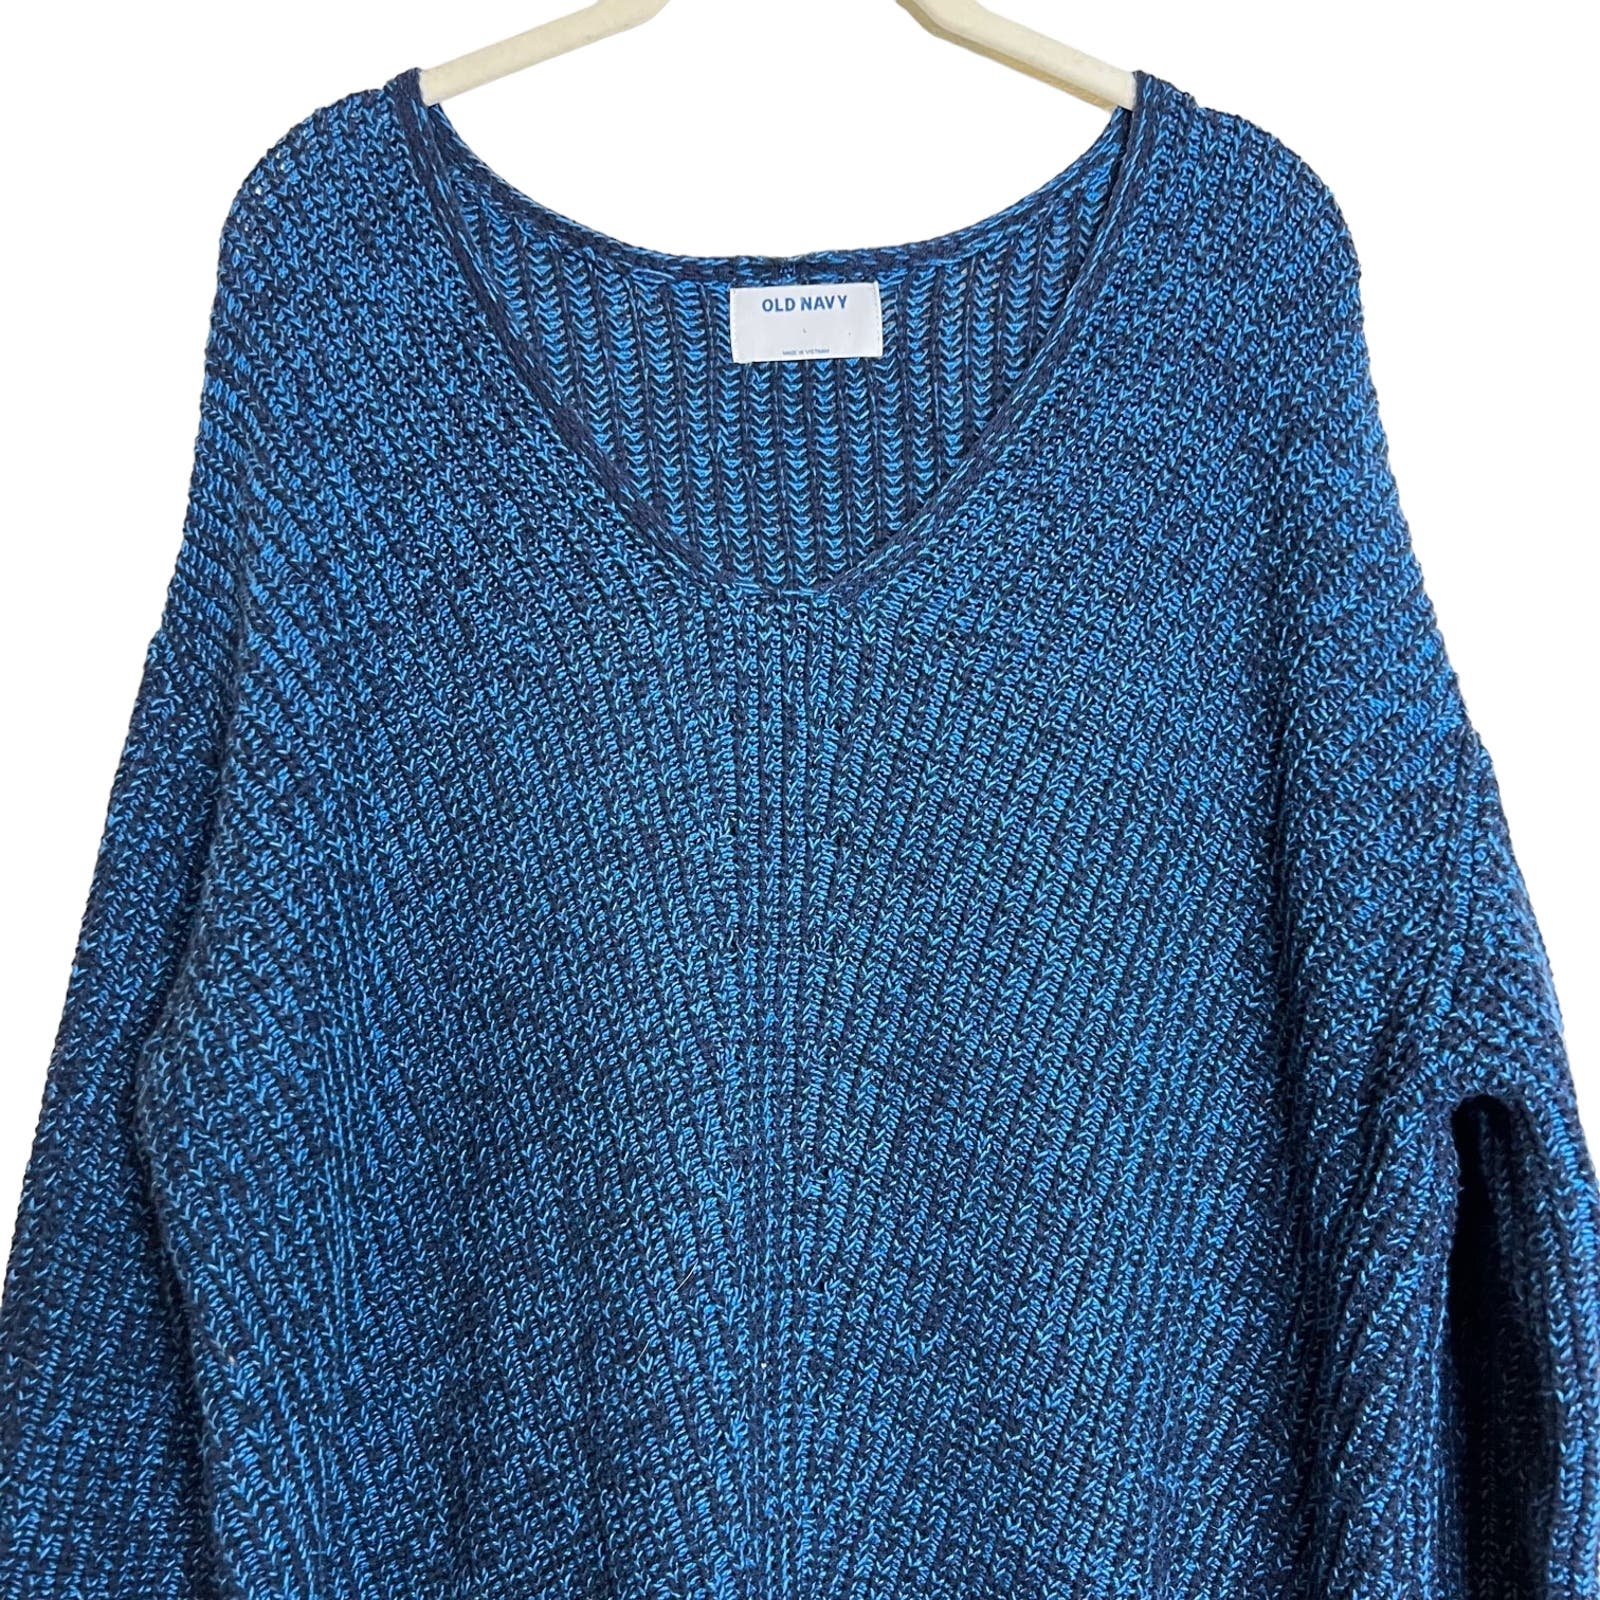 save up to 70% Old Navy Womens Sweater Large Blue Chunky Knit Rounded V-Neck Long Sleeve J5cuo2O2O well sale